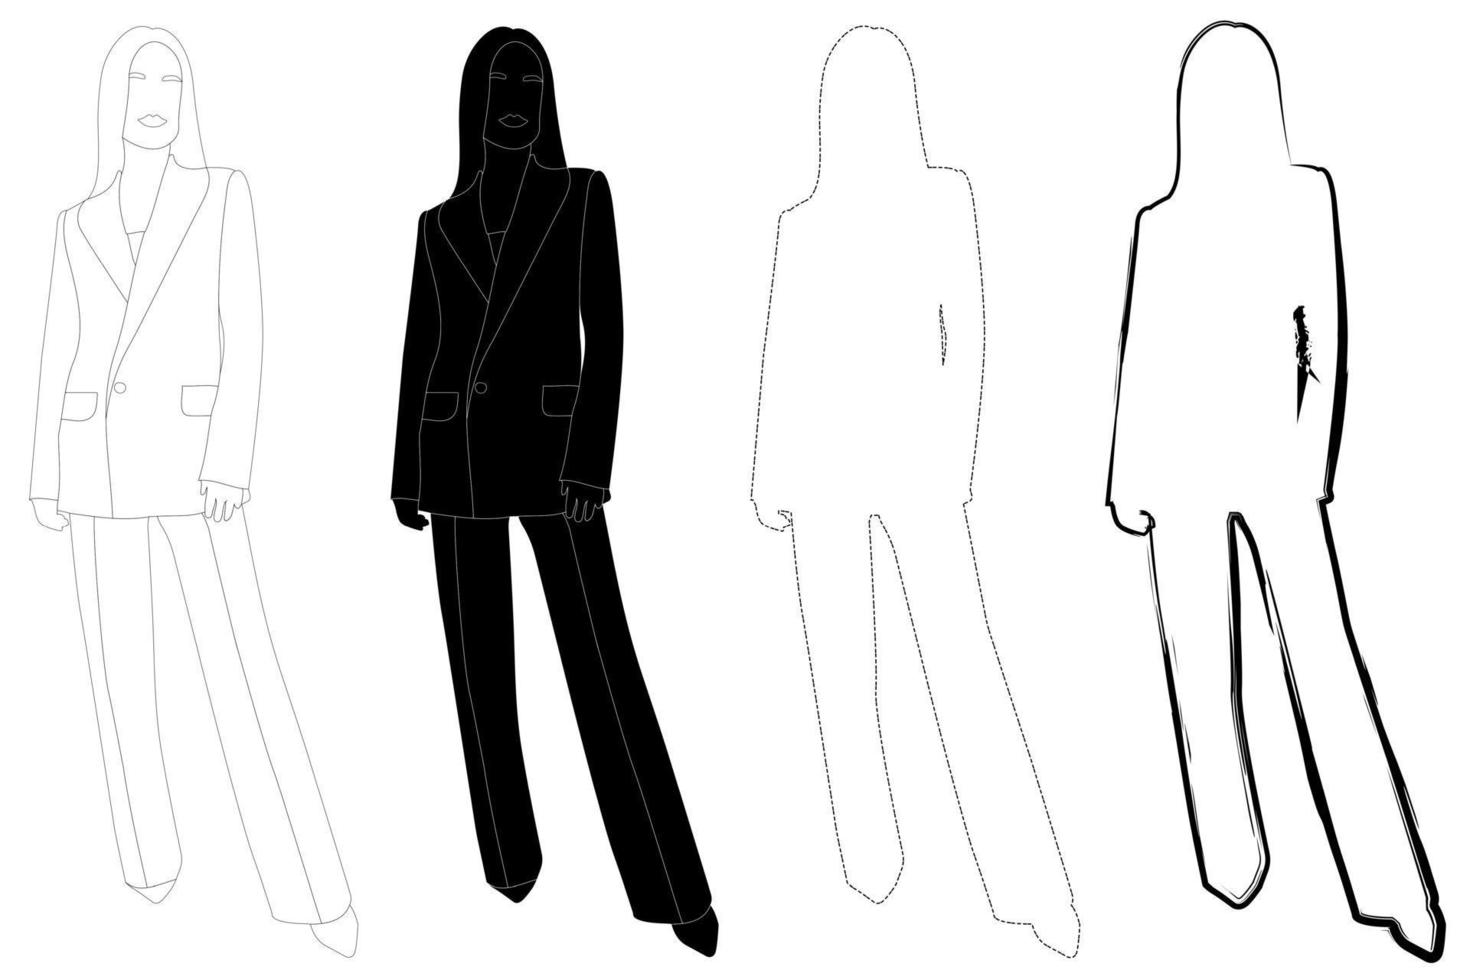 Sketch outline of the silhouette of a girl in a fashionable suit standing. Doodle black and white line drawing. vector